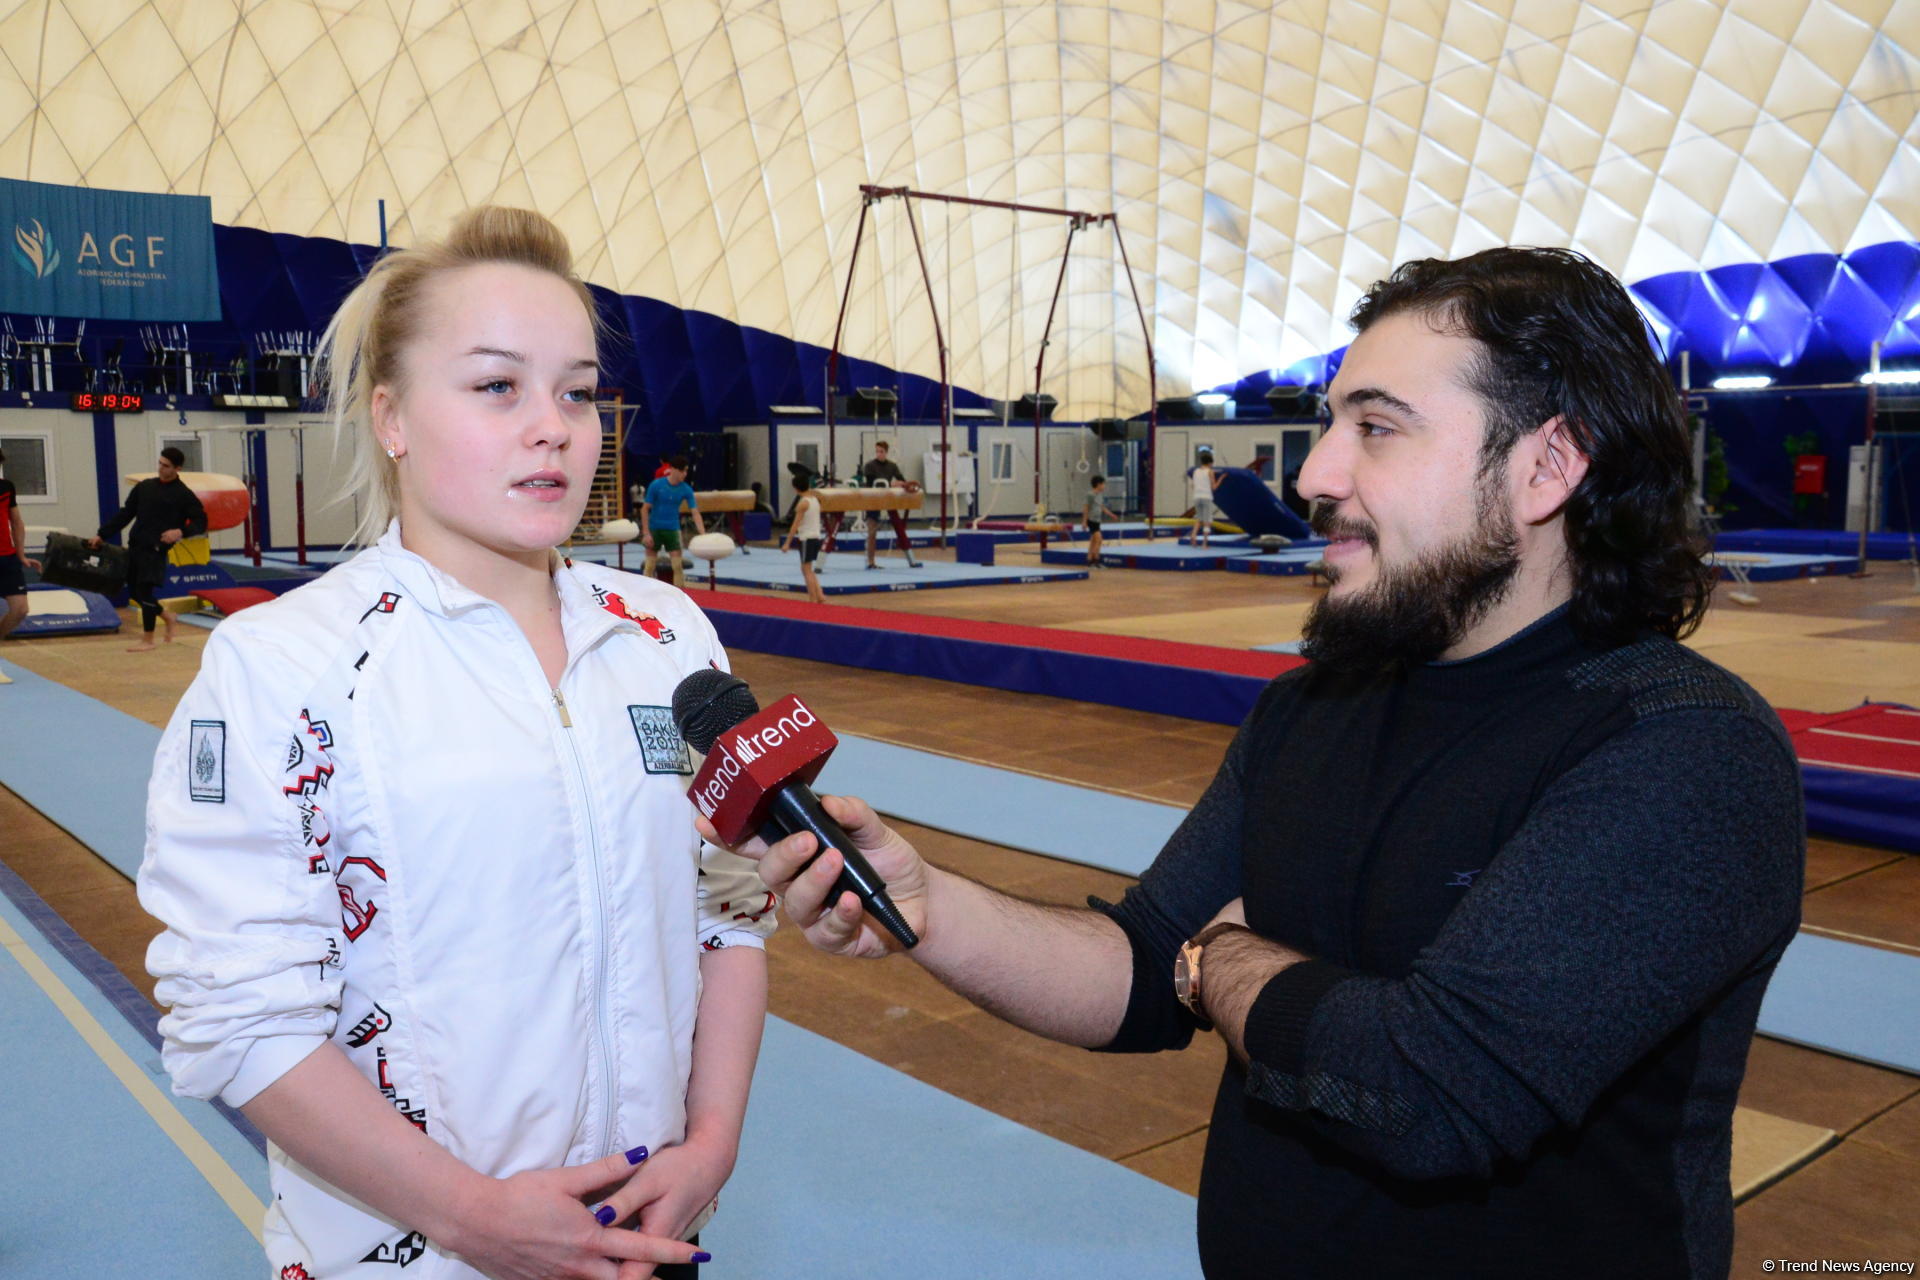 Azerbaijani gymnast talks on great competition at upcoming FIG event (PHOTO)